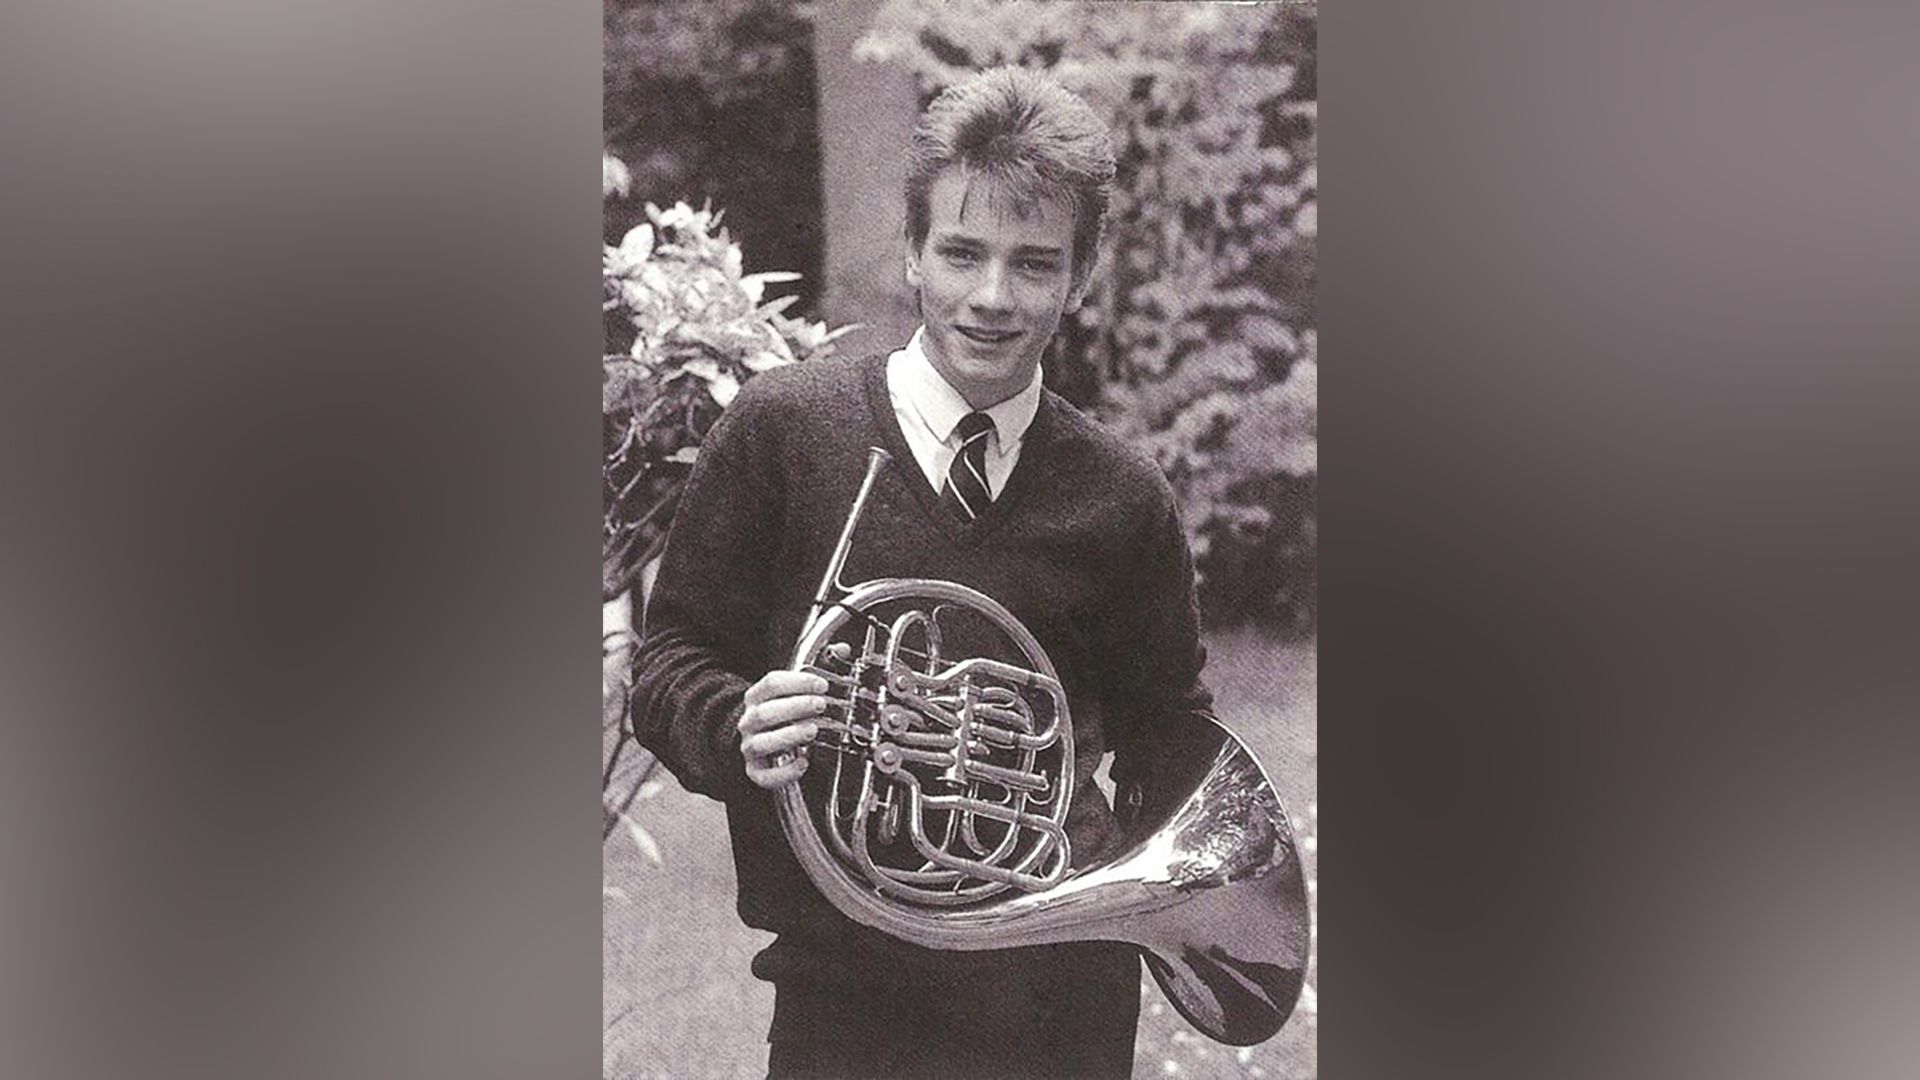 Ewan McGregor used to play French horn when he was younger